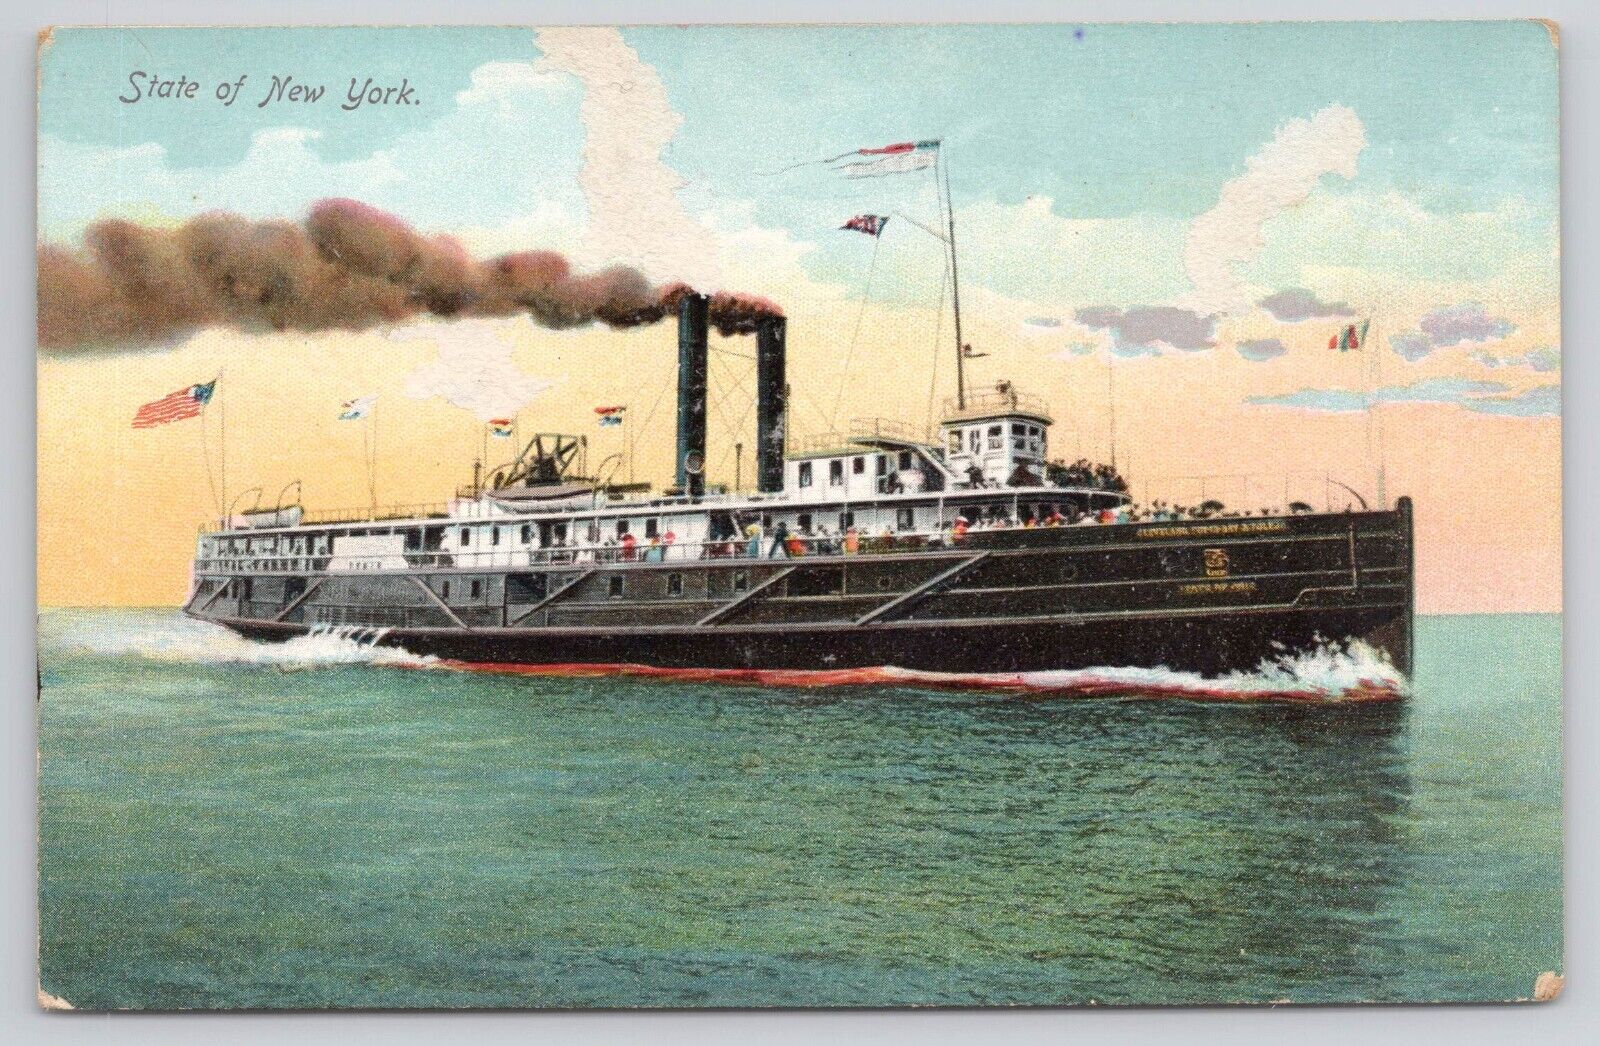 c 1910 Steamer S.S. State of New York Steamship Antique Postcard